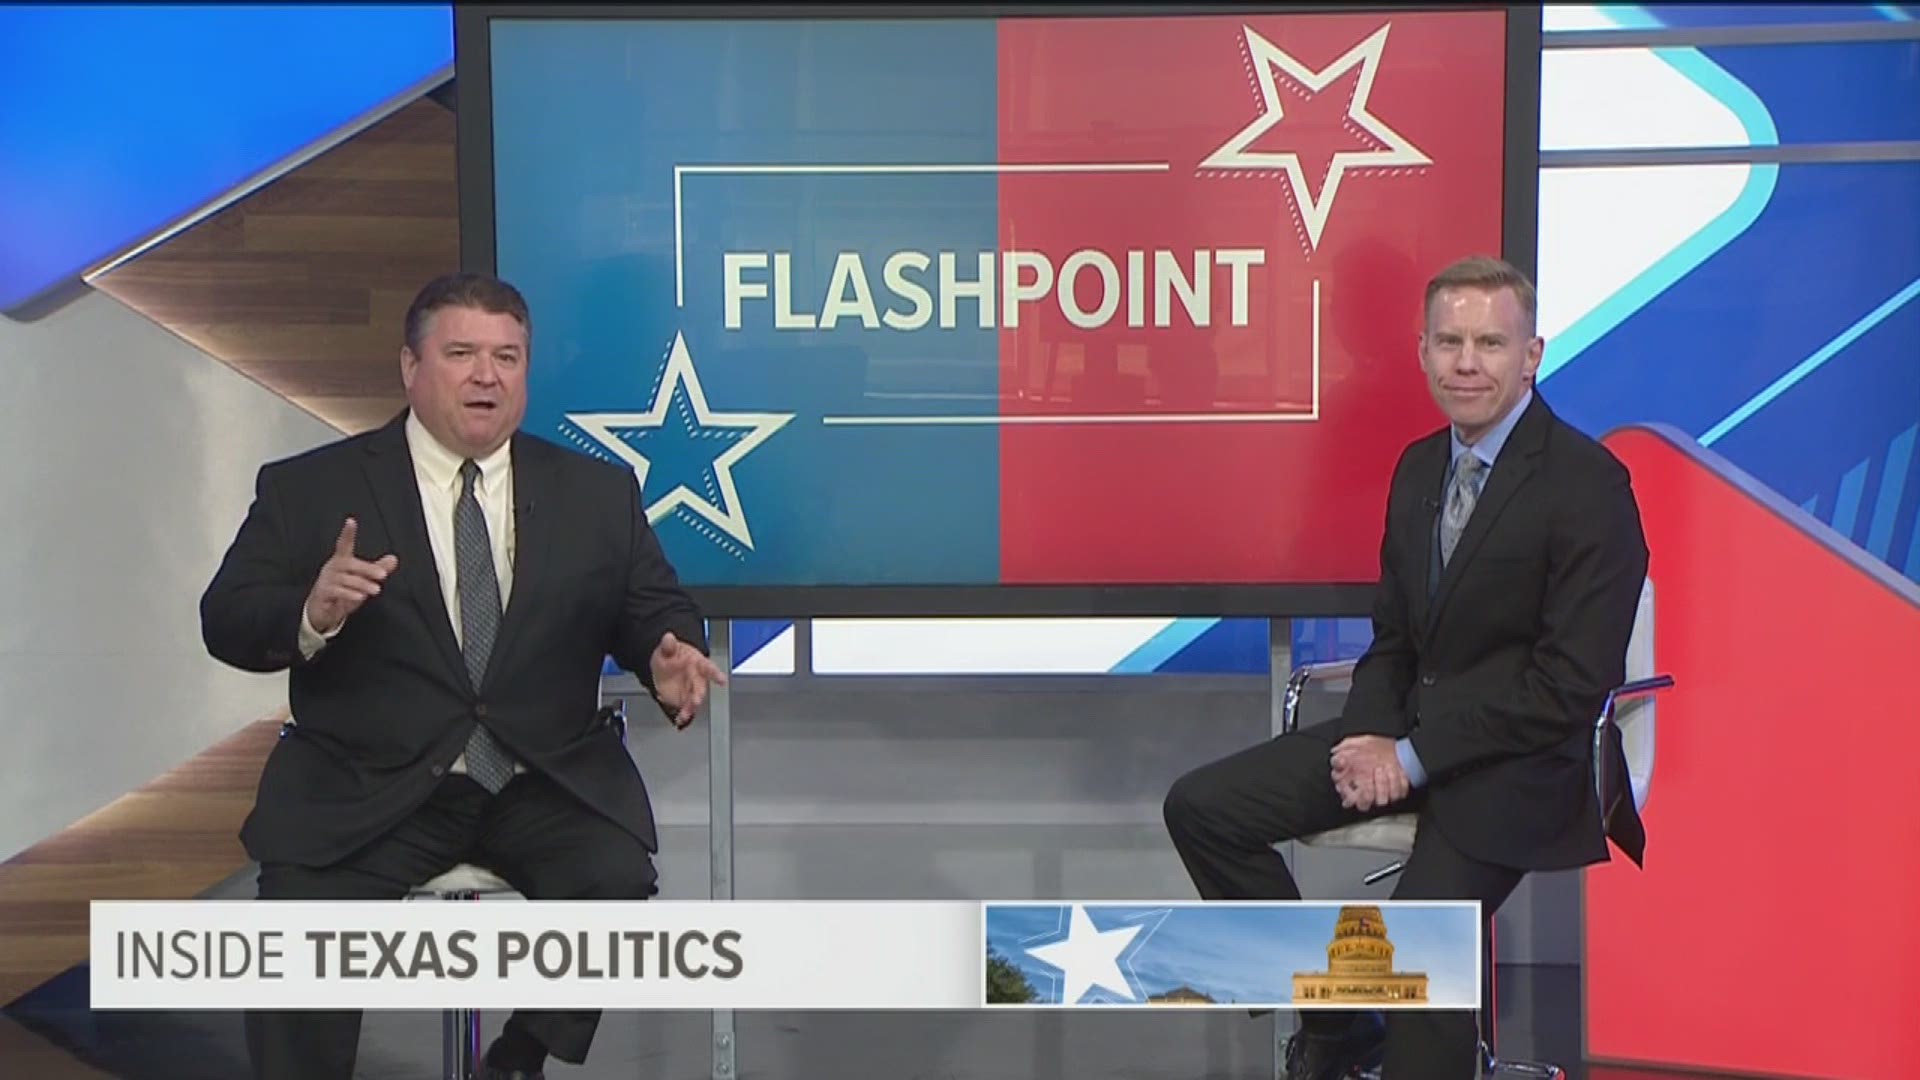 Wade Emert, former Dallas County GOP chair, and Rich Hancock, with Virtual News Center, discuss Beto O'Rourke and his run for presidency.